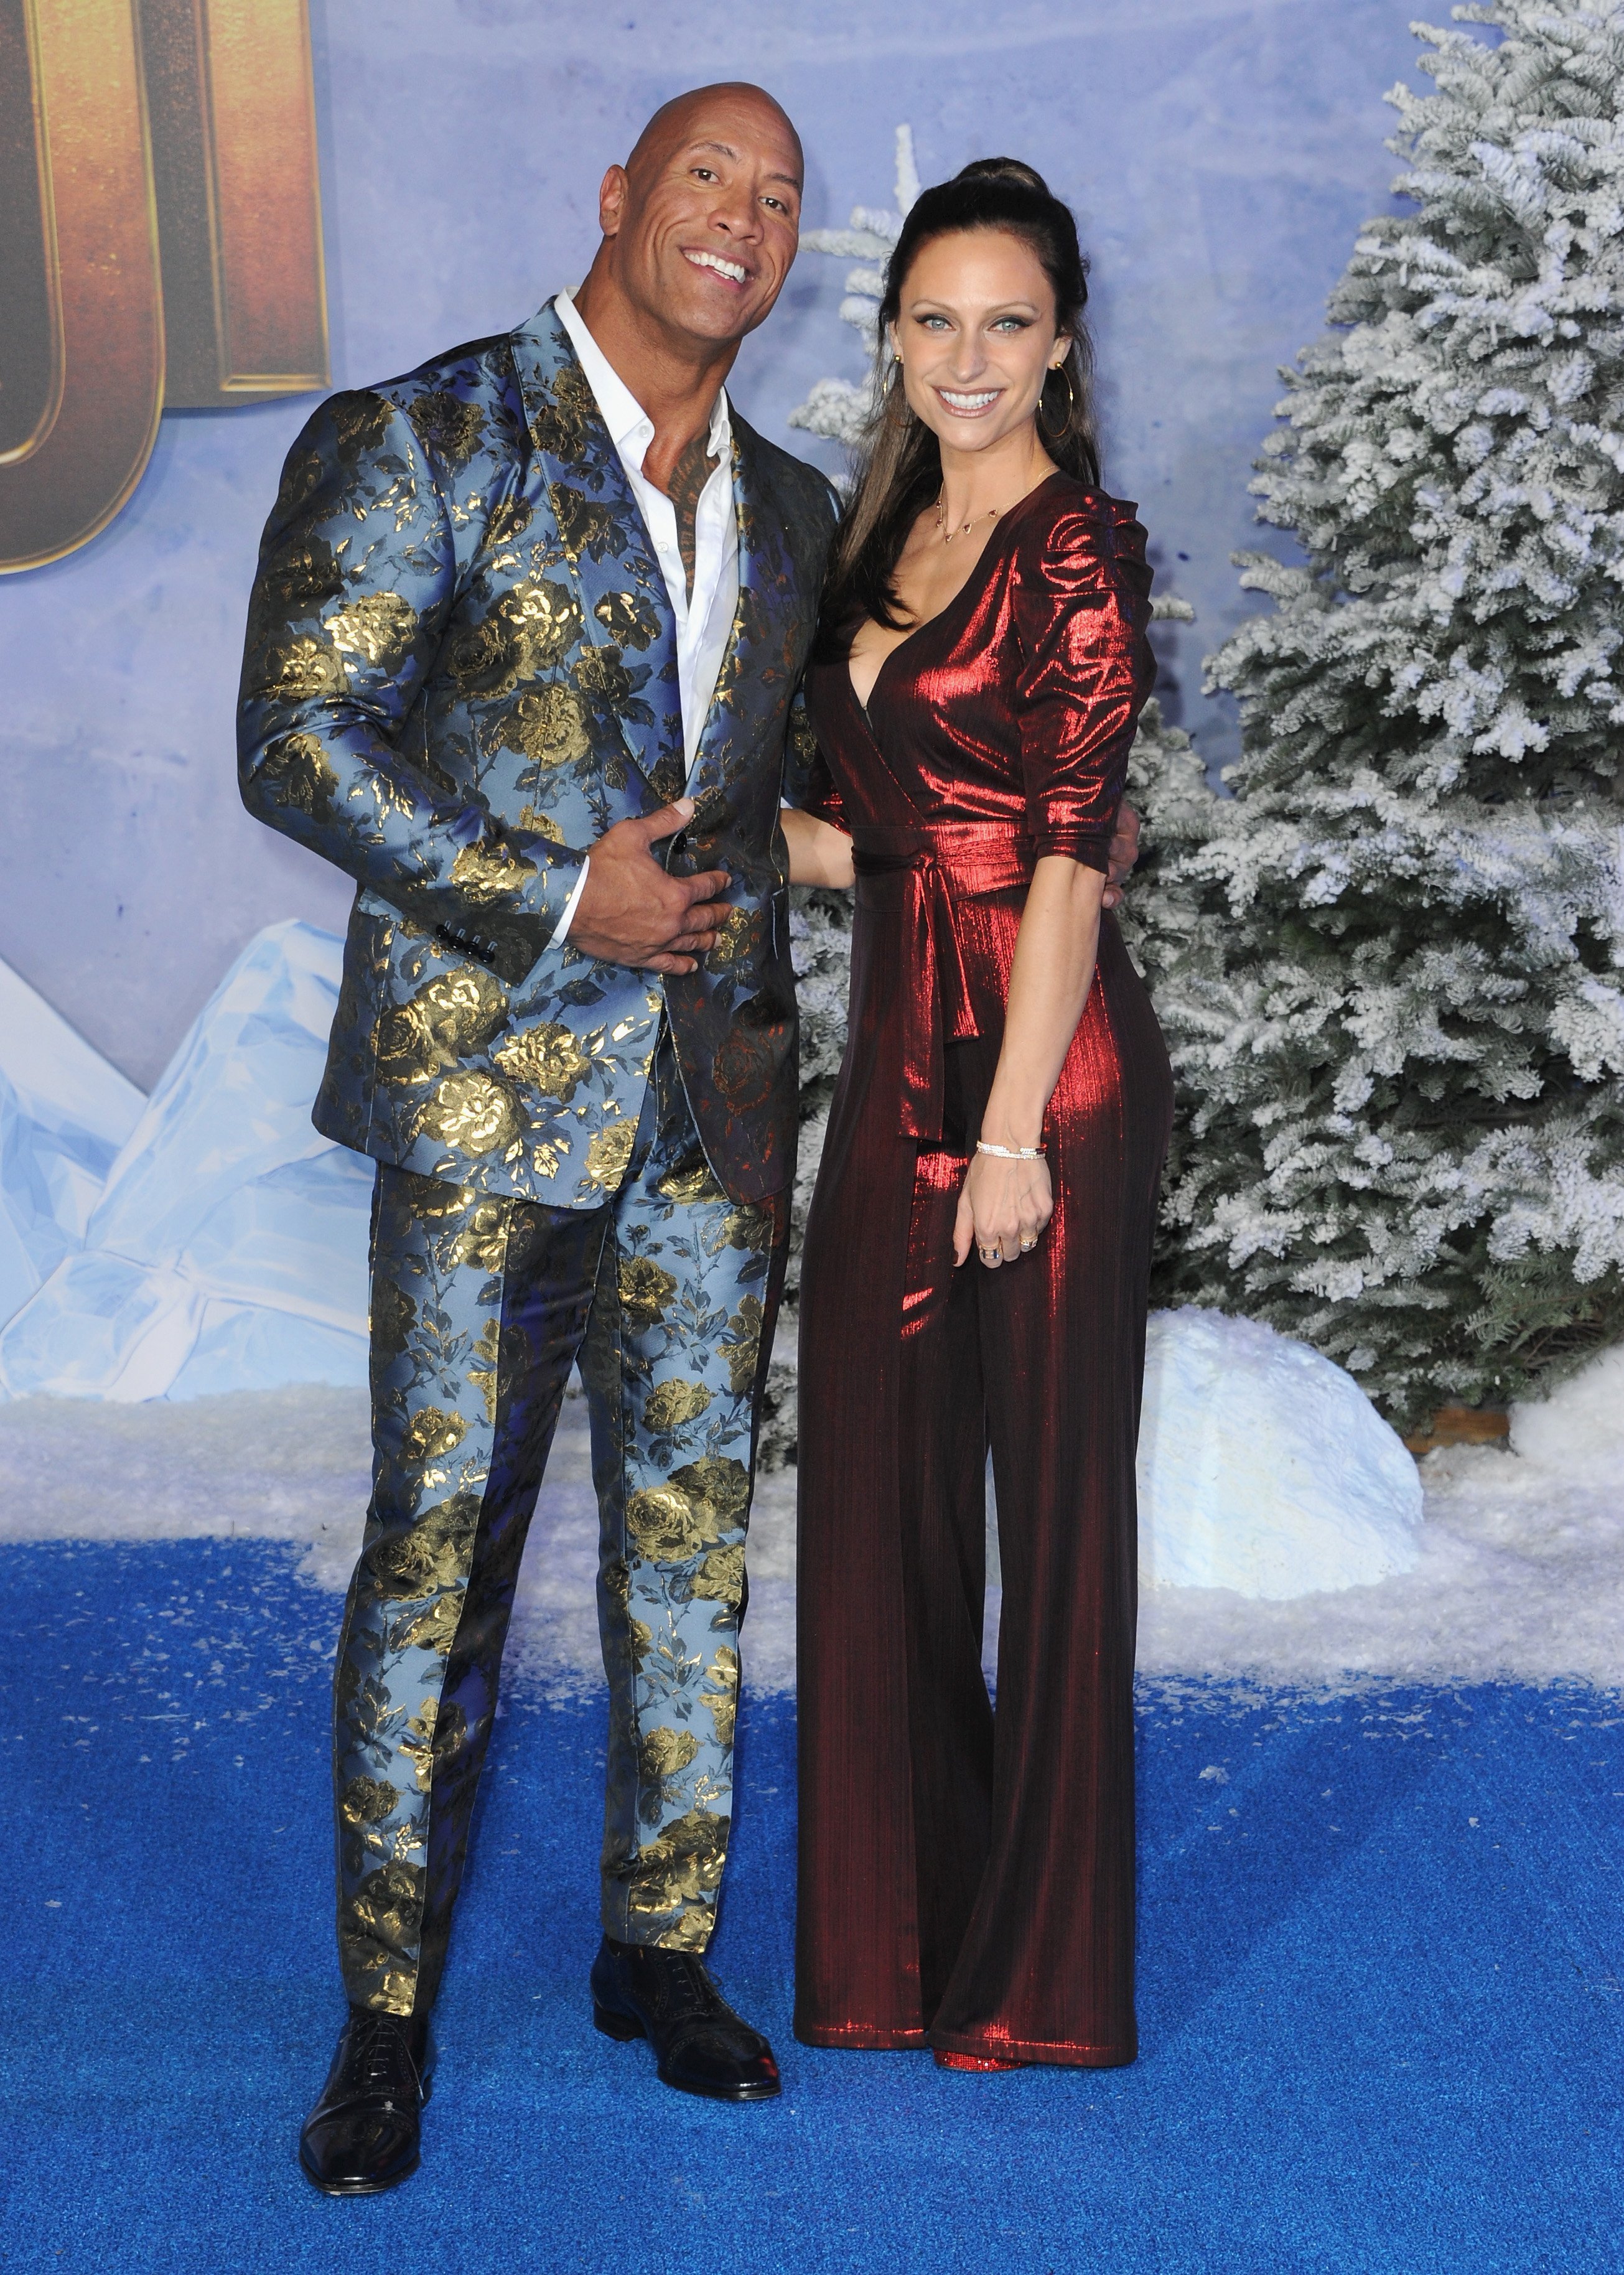 Dwayne Johnson and wife Lauren Hashian arrive at the Premiere Of Sony Pictures' "Jumanji: The Next Level" held at TCL Chinese Theatre on December 9, 2019, in Hollywood, California. | Source: Getty Images.